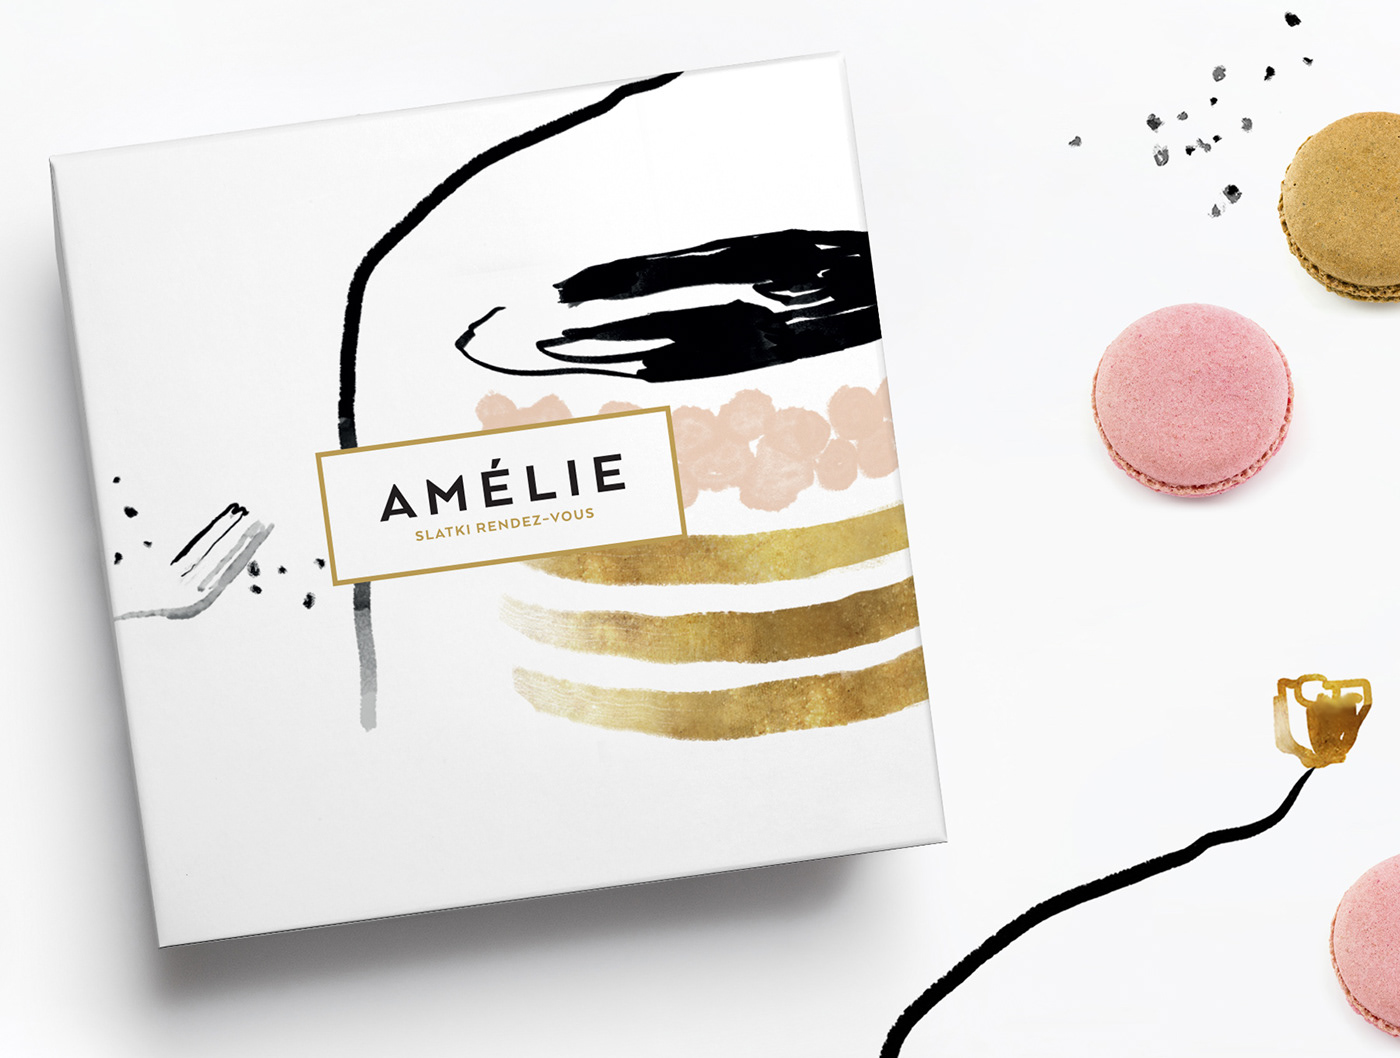 amelie pastry cake cakes biscuits macarons Croatia Zagreb visual identity